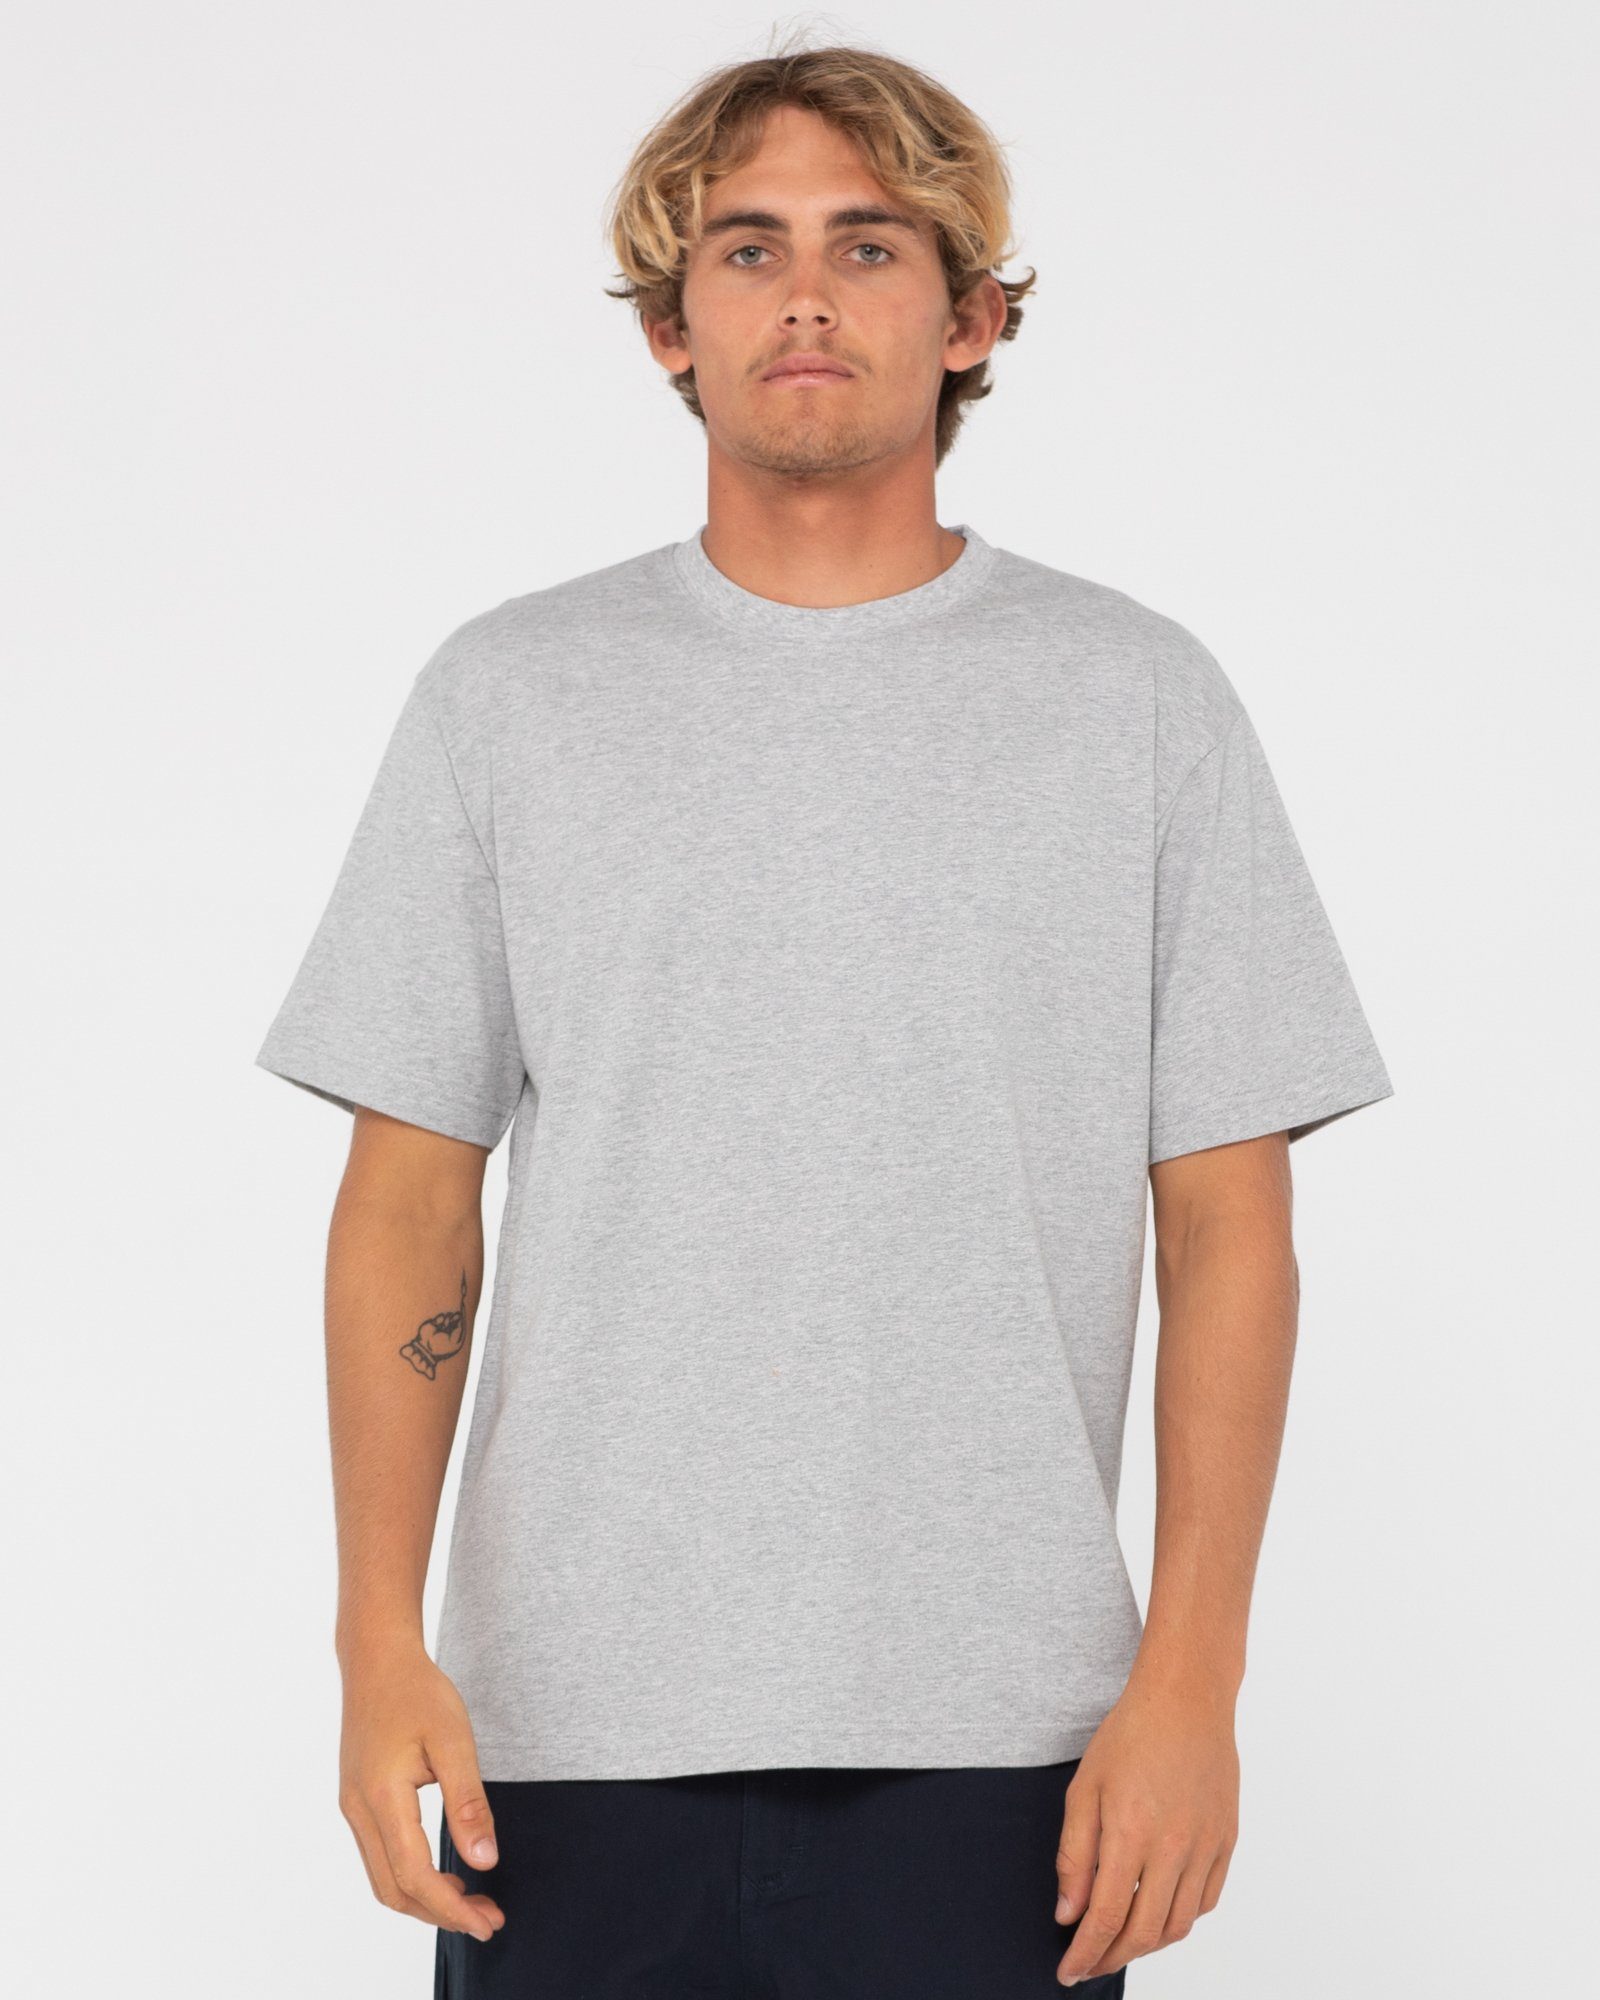 Rusty T-Shirt DELUXE BLANK S/S TEE Grey Marle